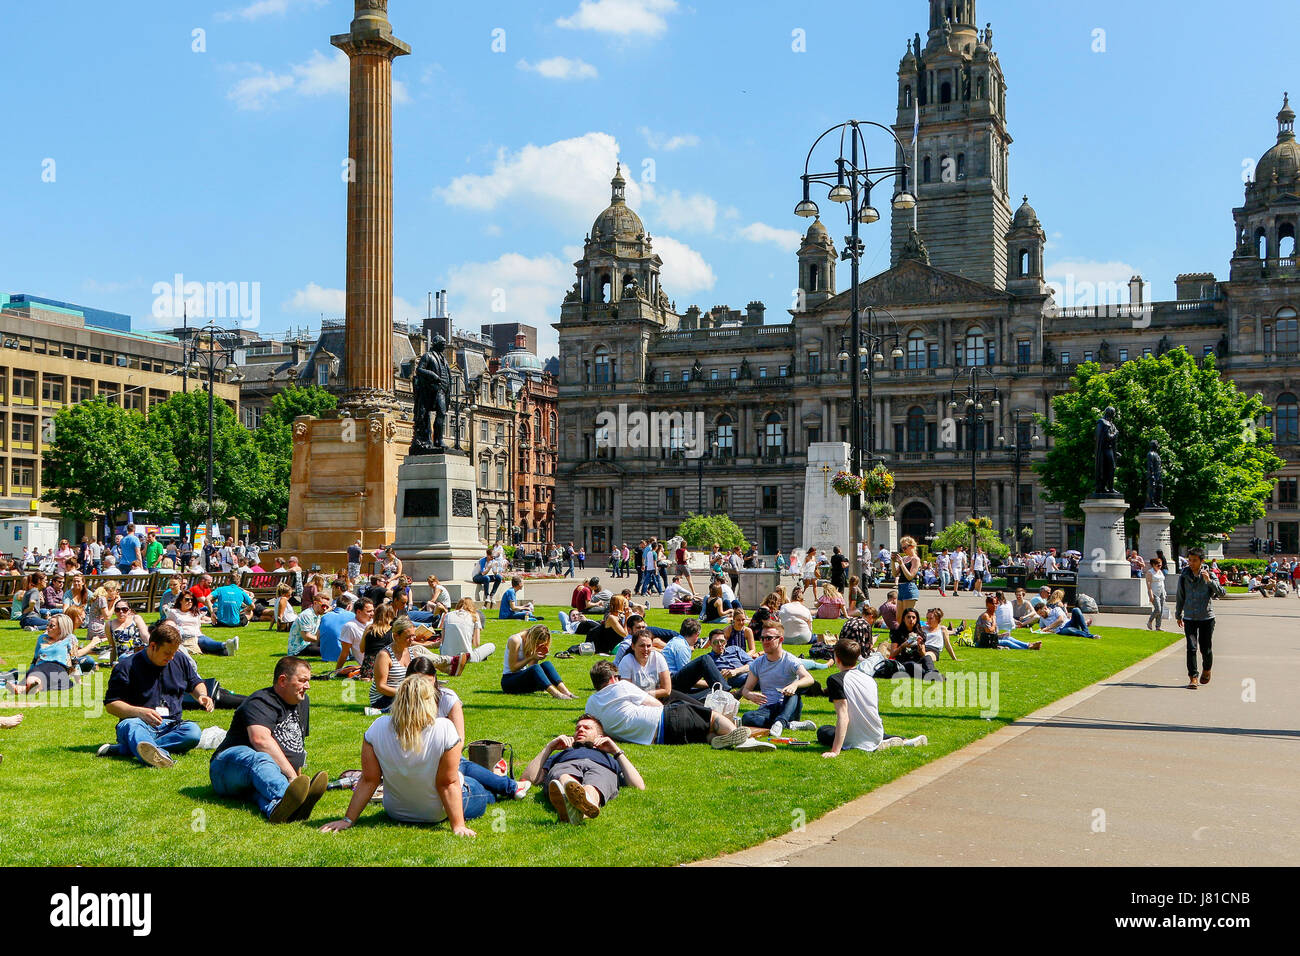 Glasgow, Scotland, UK. 26th May, 2017. As temperatures soar into the high 20 C's the people of Glasgow take time to relax and do a bit of lunch and sunbathing in George Square. Credit: Findlay/Alamy Live News Stock Photo